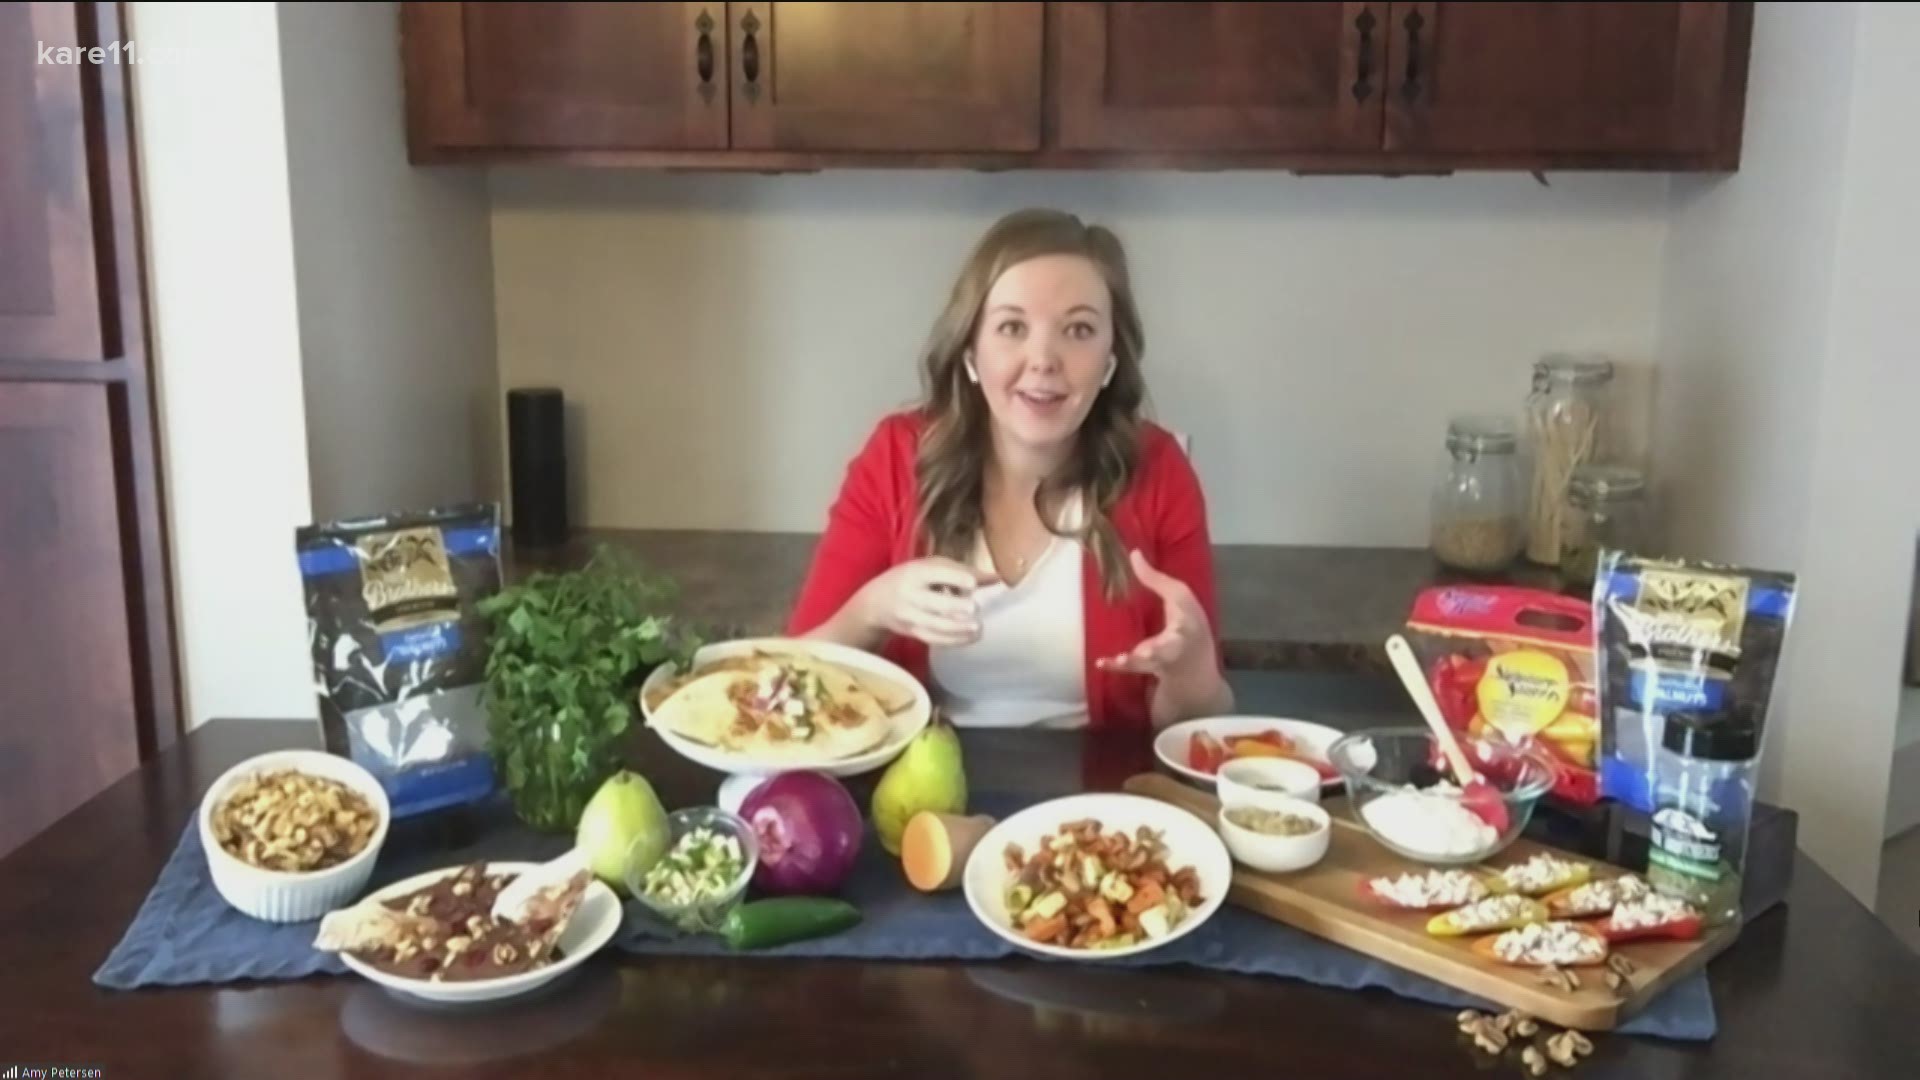 Amy Petersen, supermarket registered dietician at Coborn's, shows us a heart-healthy snack with peppers, cottage cheese and walnuts.